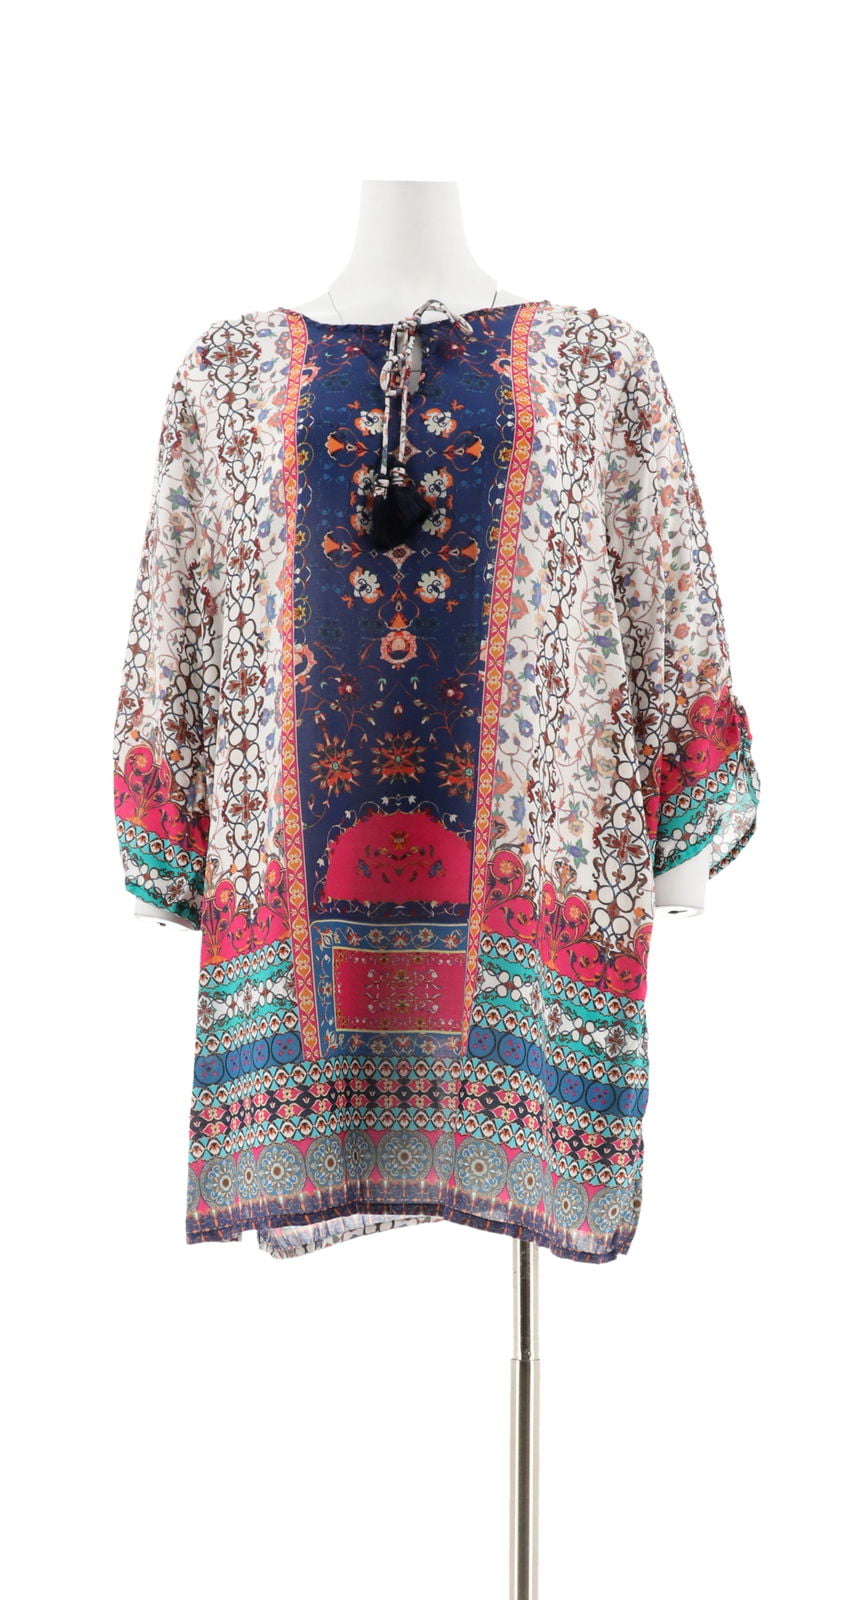 Tolani Collection - Tolani Collection Printed Woven Tunic Front Tassels ...